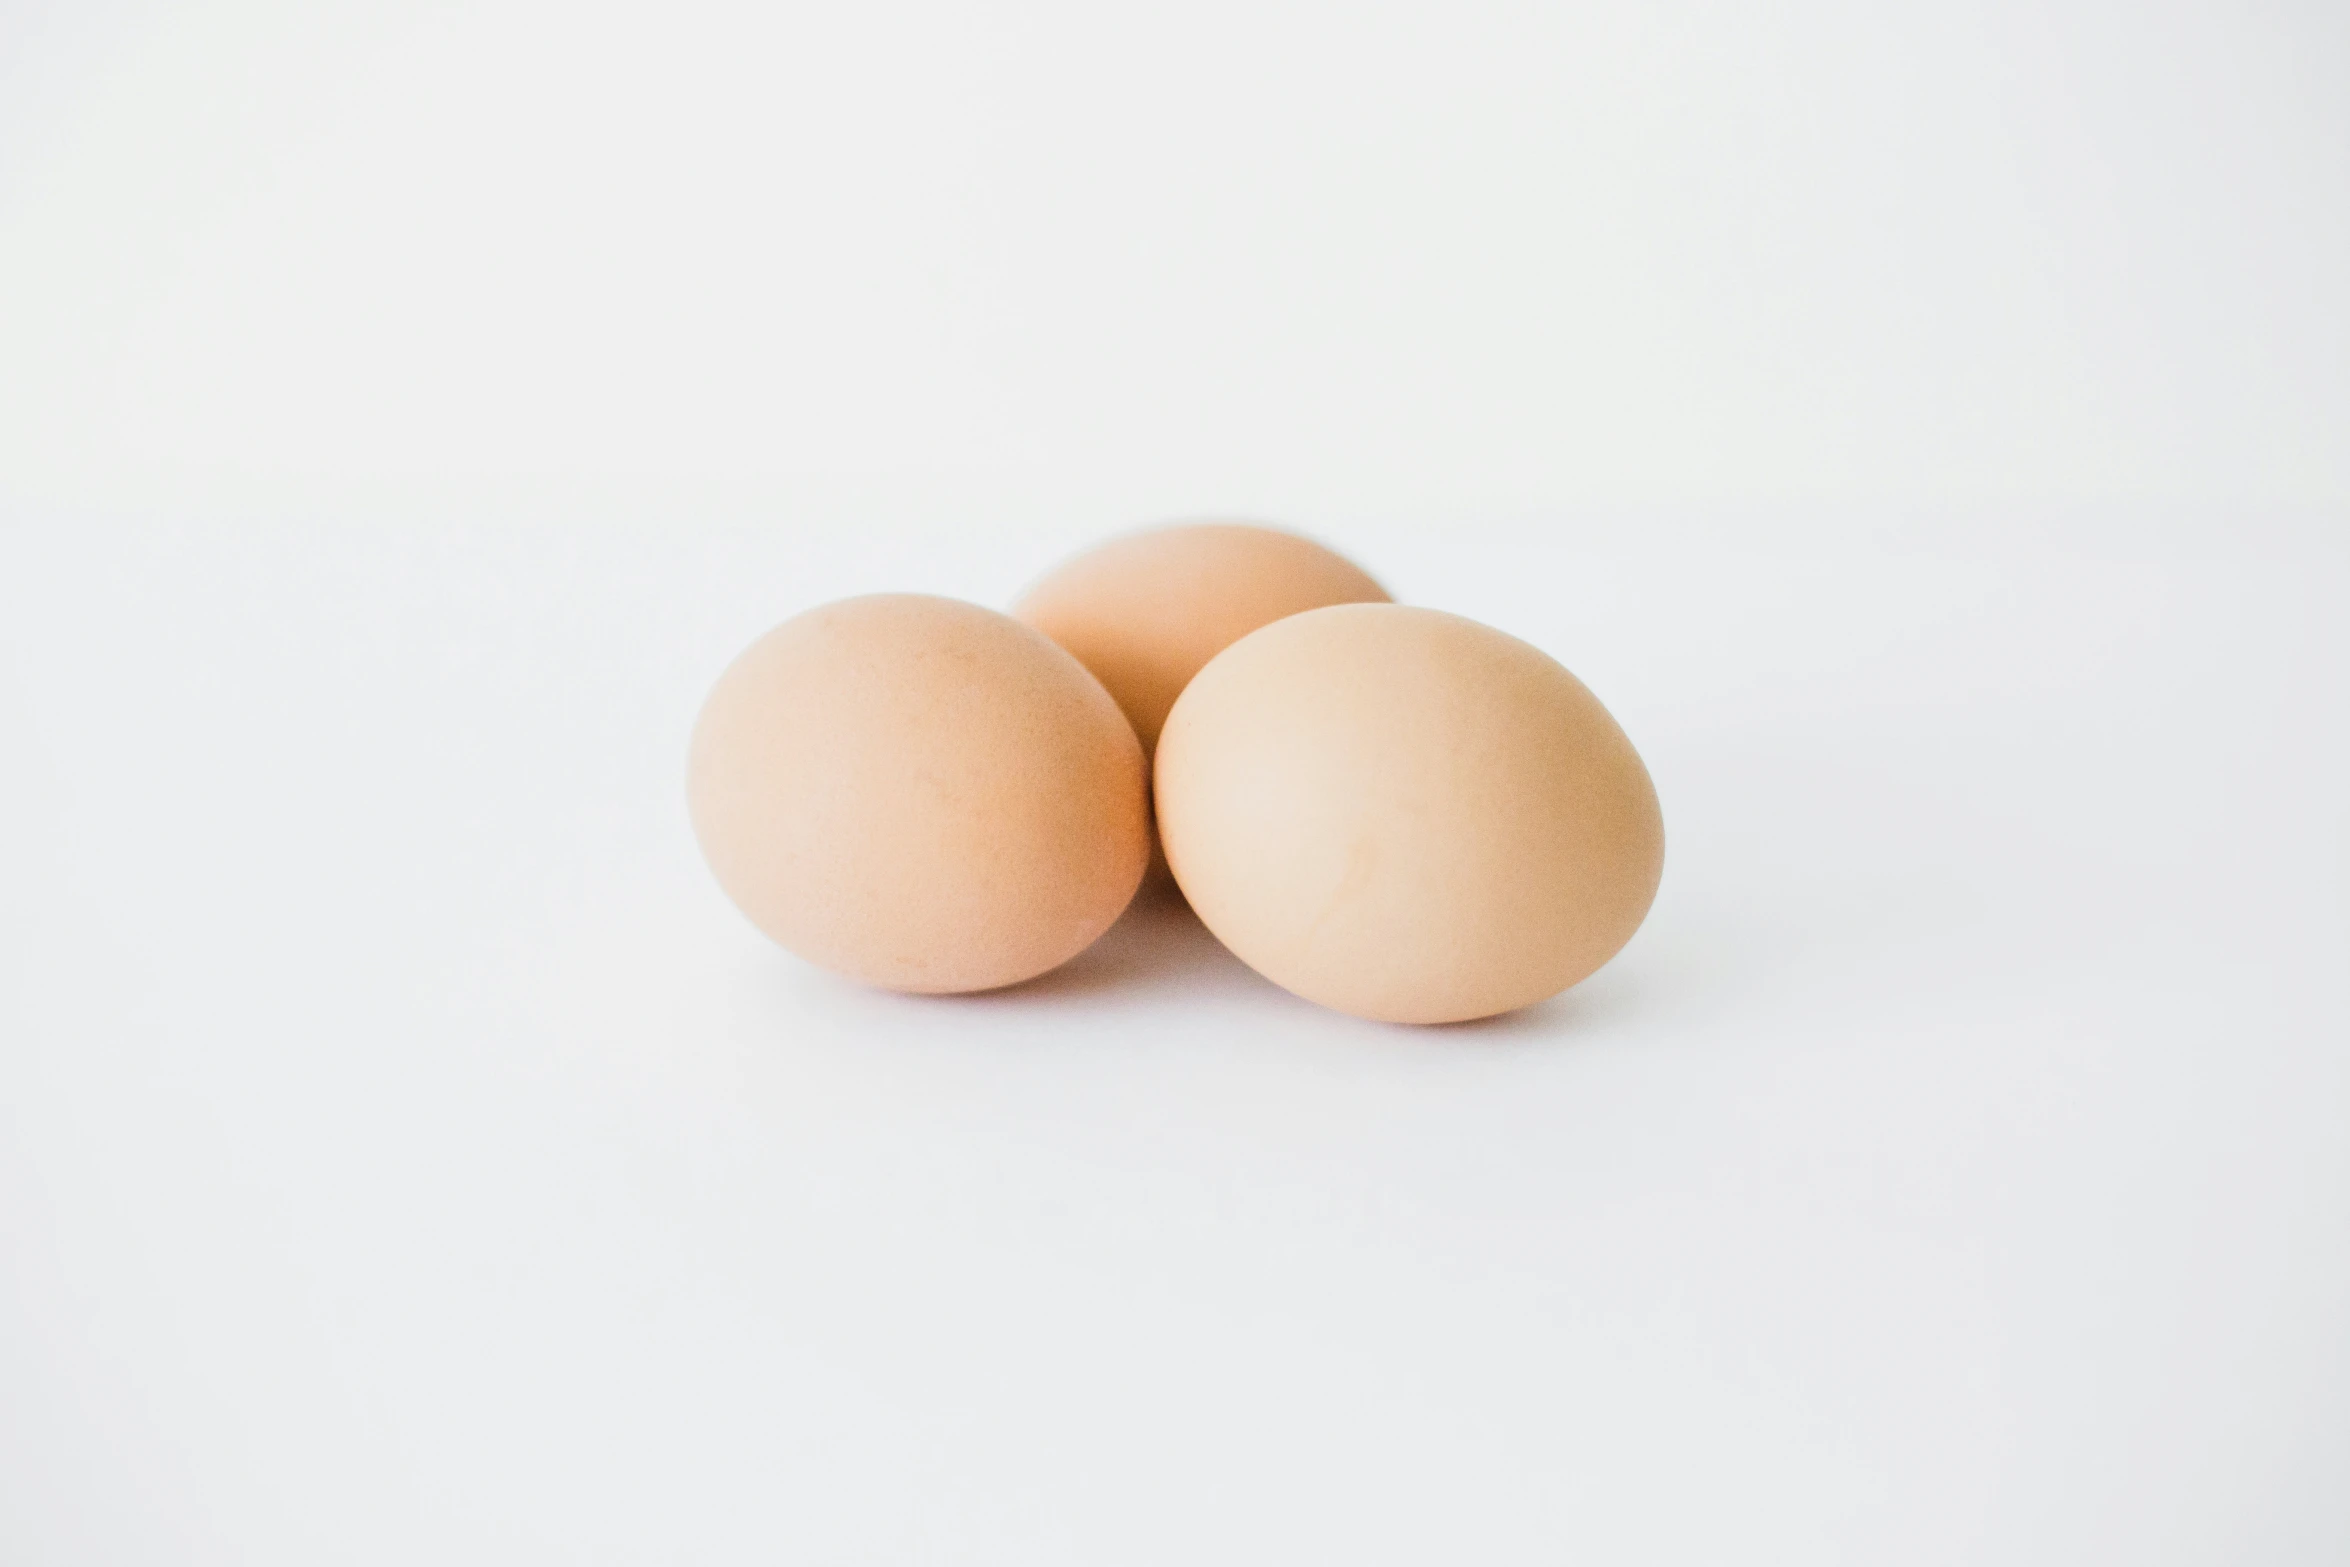 four eggs sitting next to each other on a table